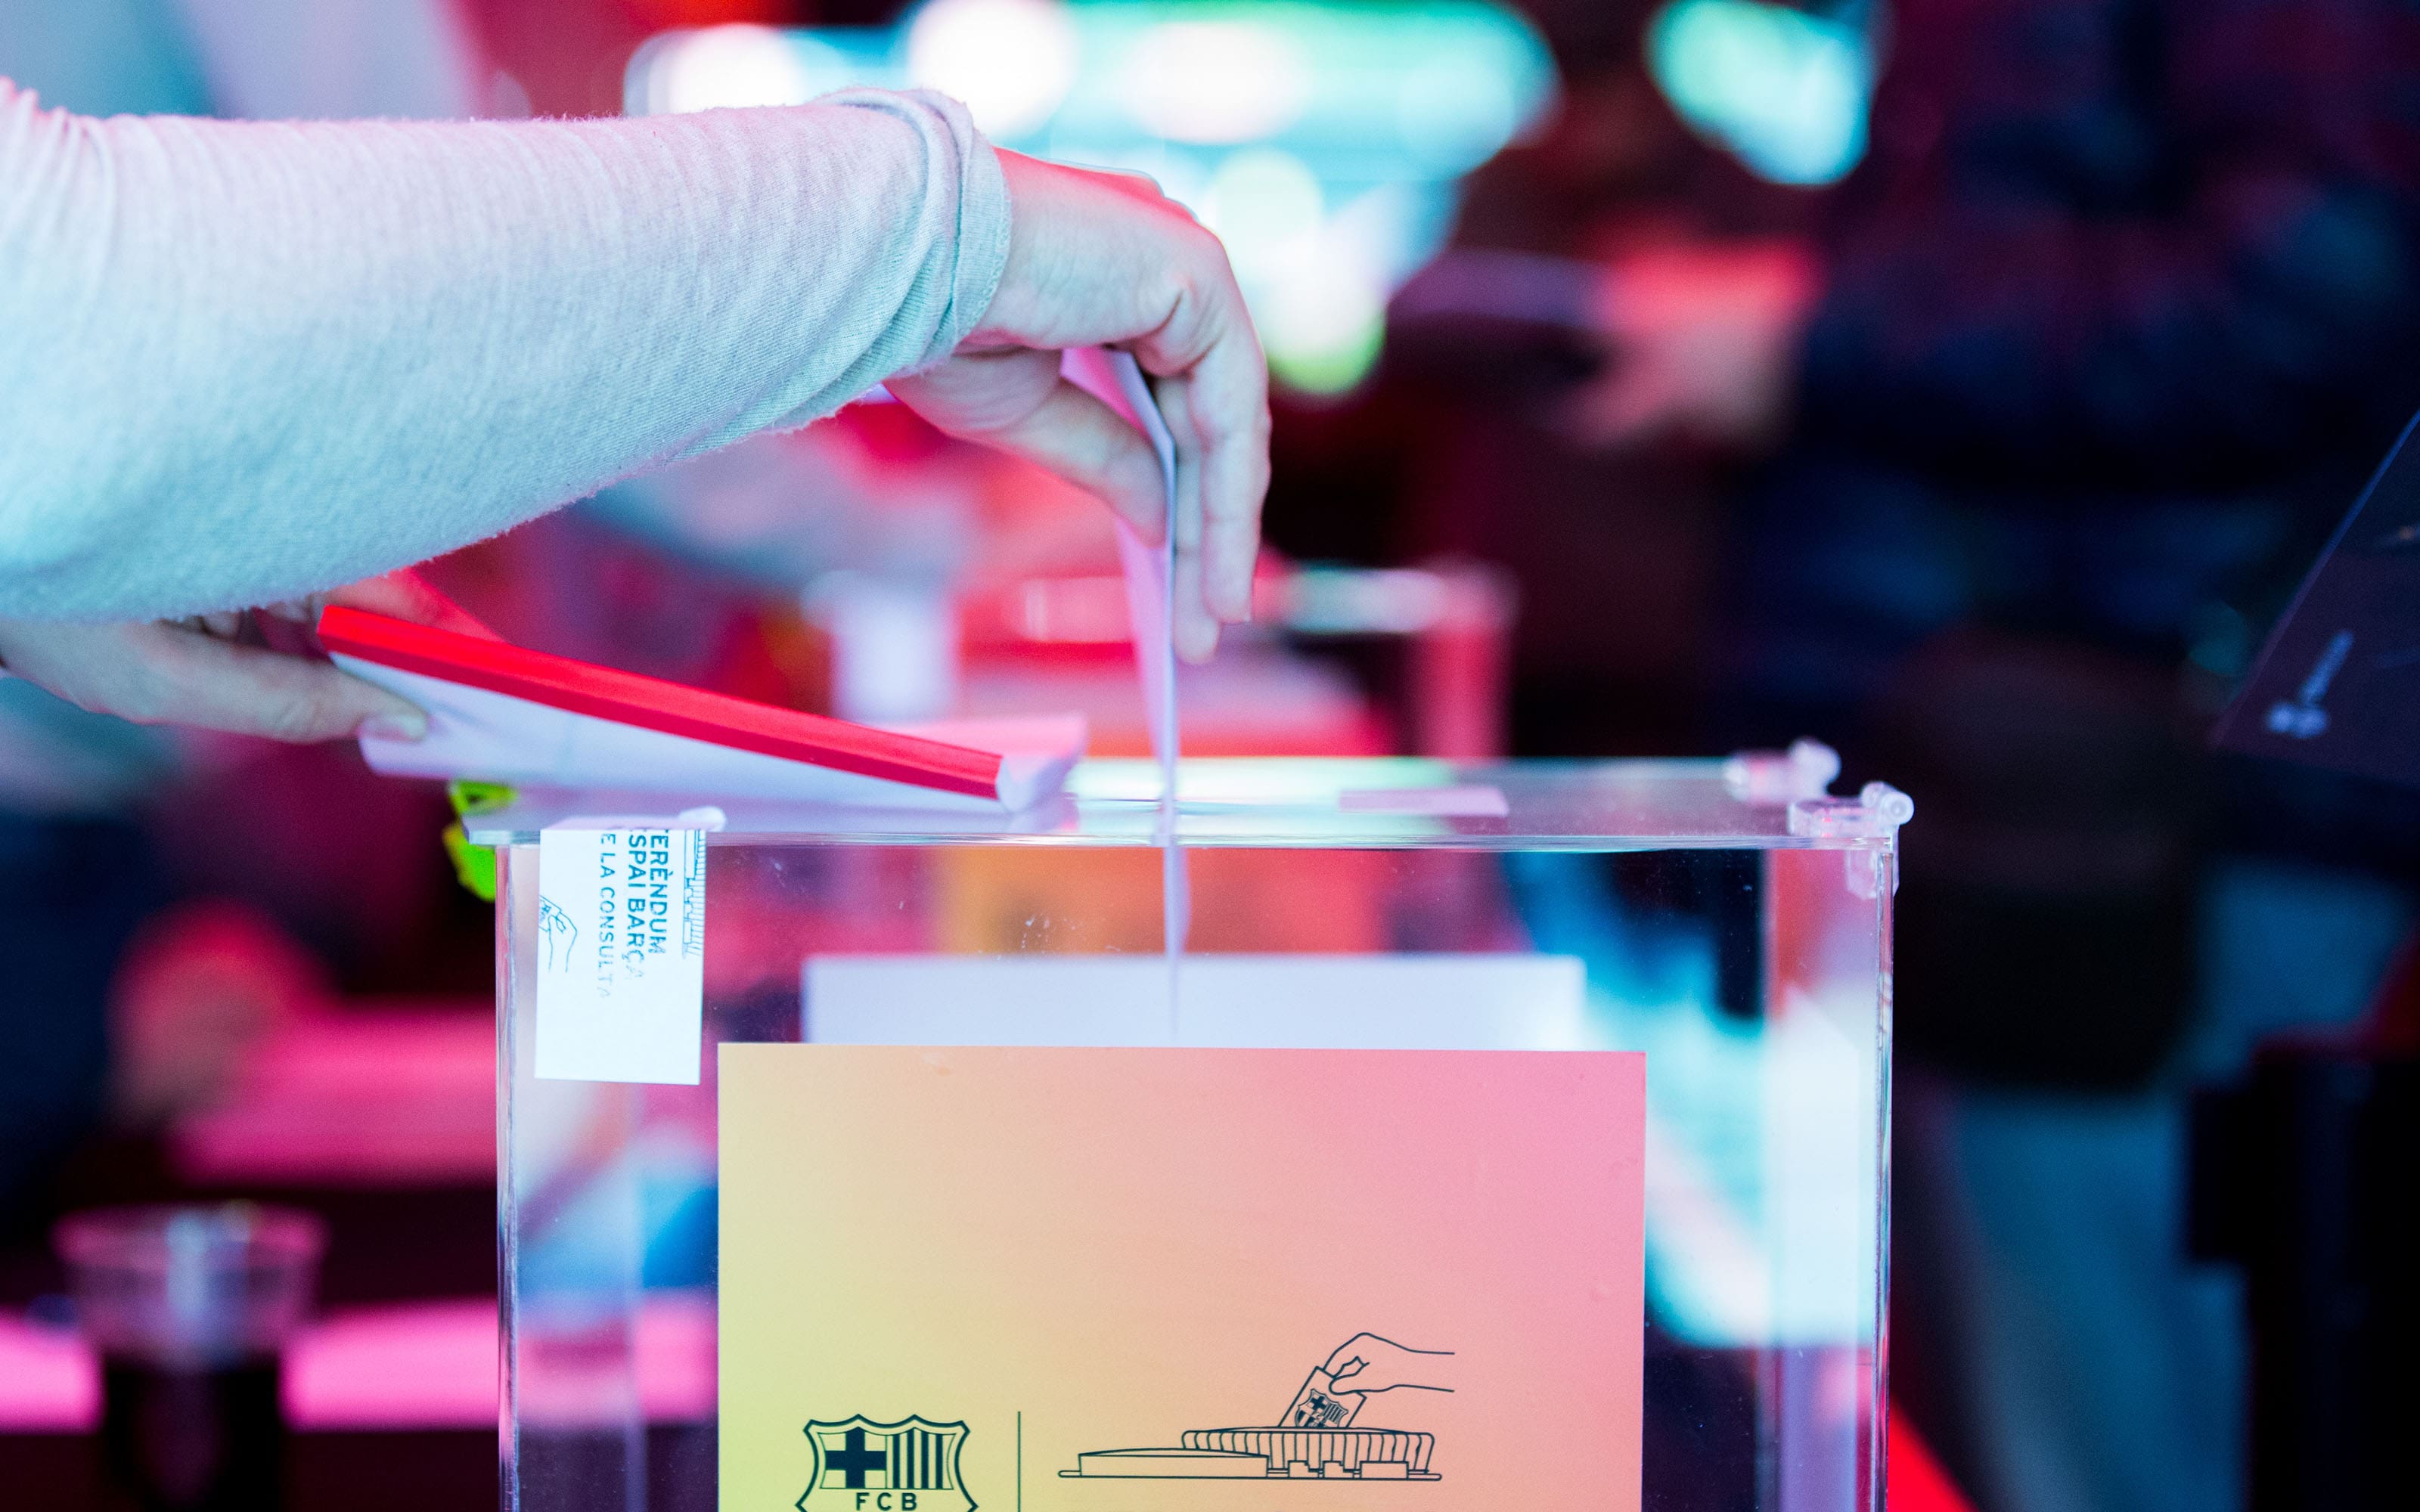 A ballot being placed into a box from a past FC Barcelona presidential election (image from FC Barcelona website)